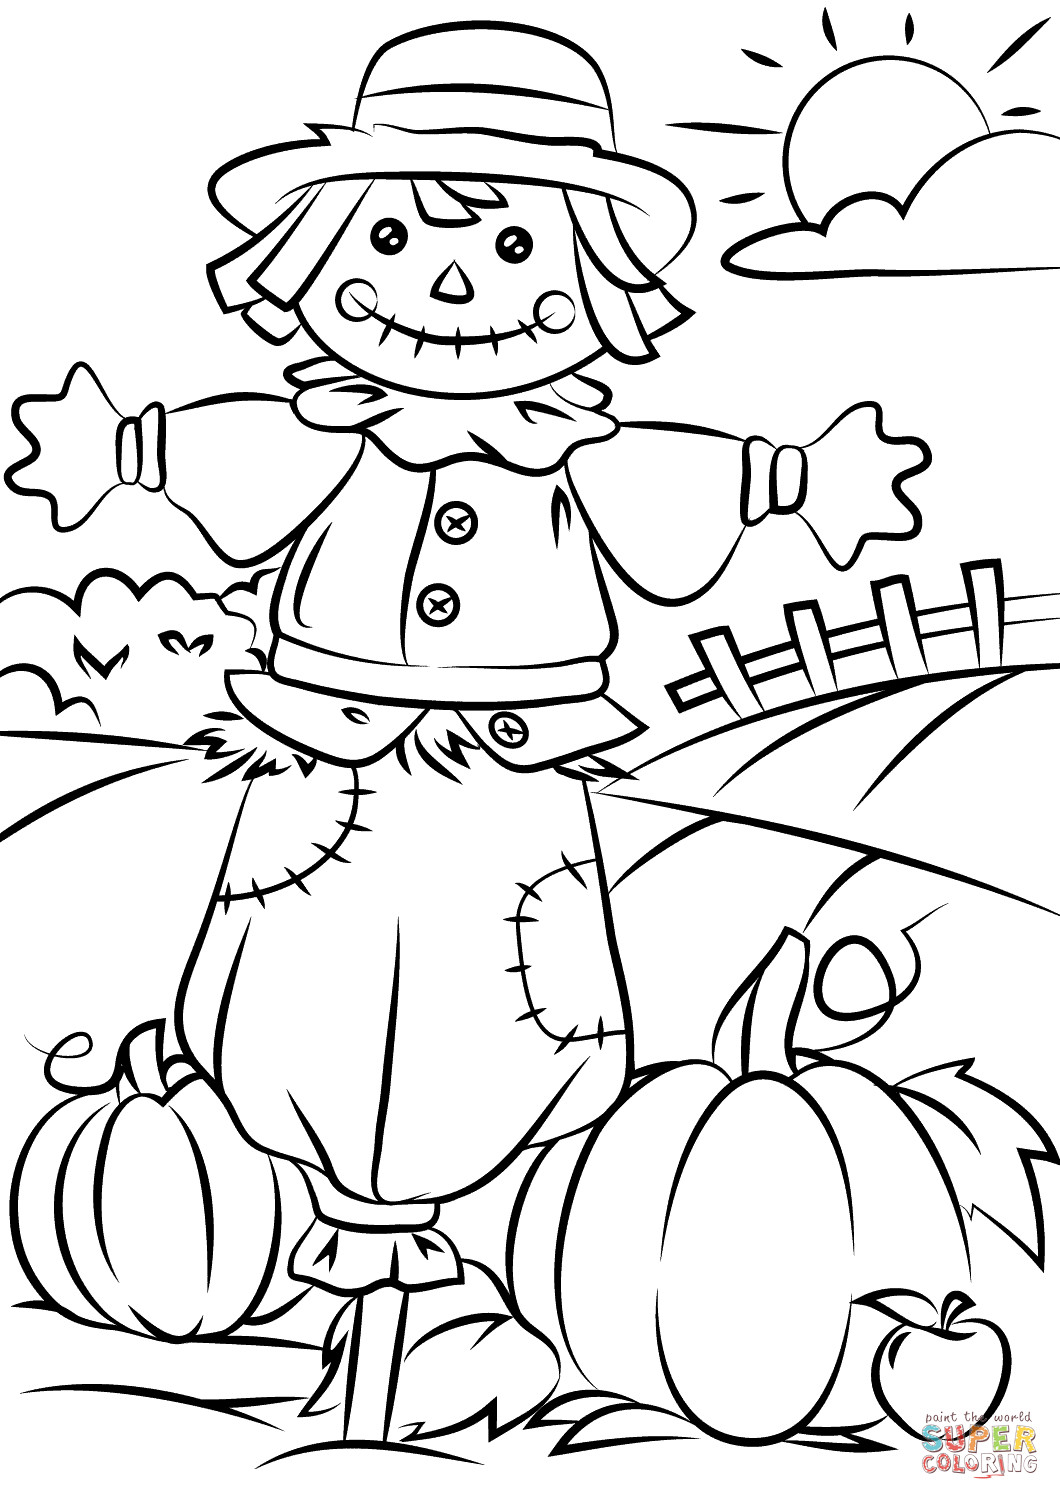 Kids Coloring Pages Fall
 Autumn Scene with Scarecrow coloring page